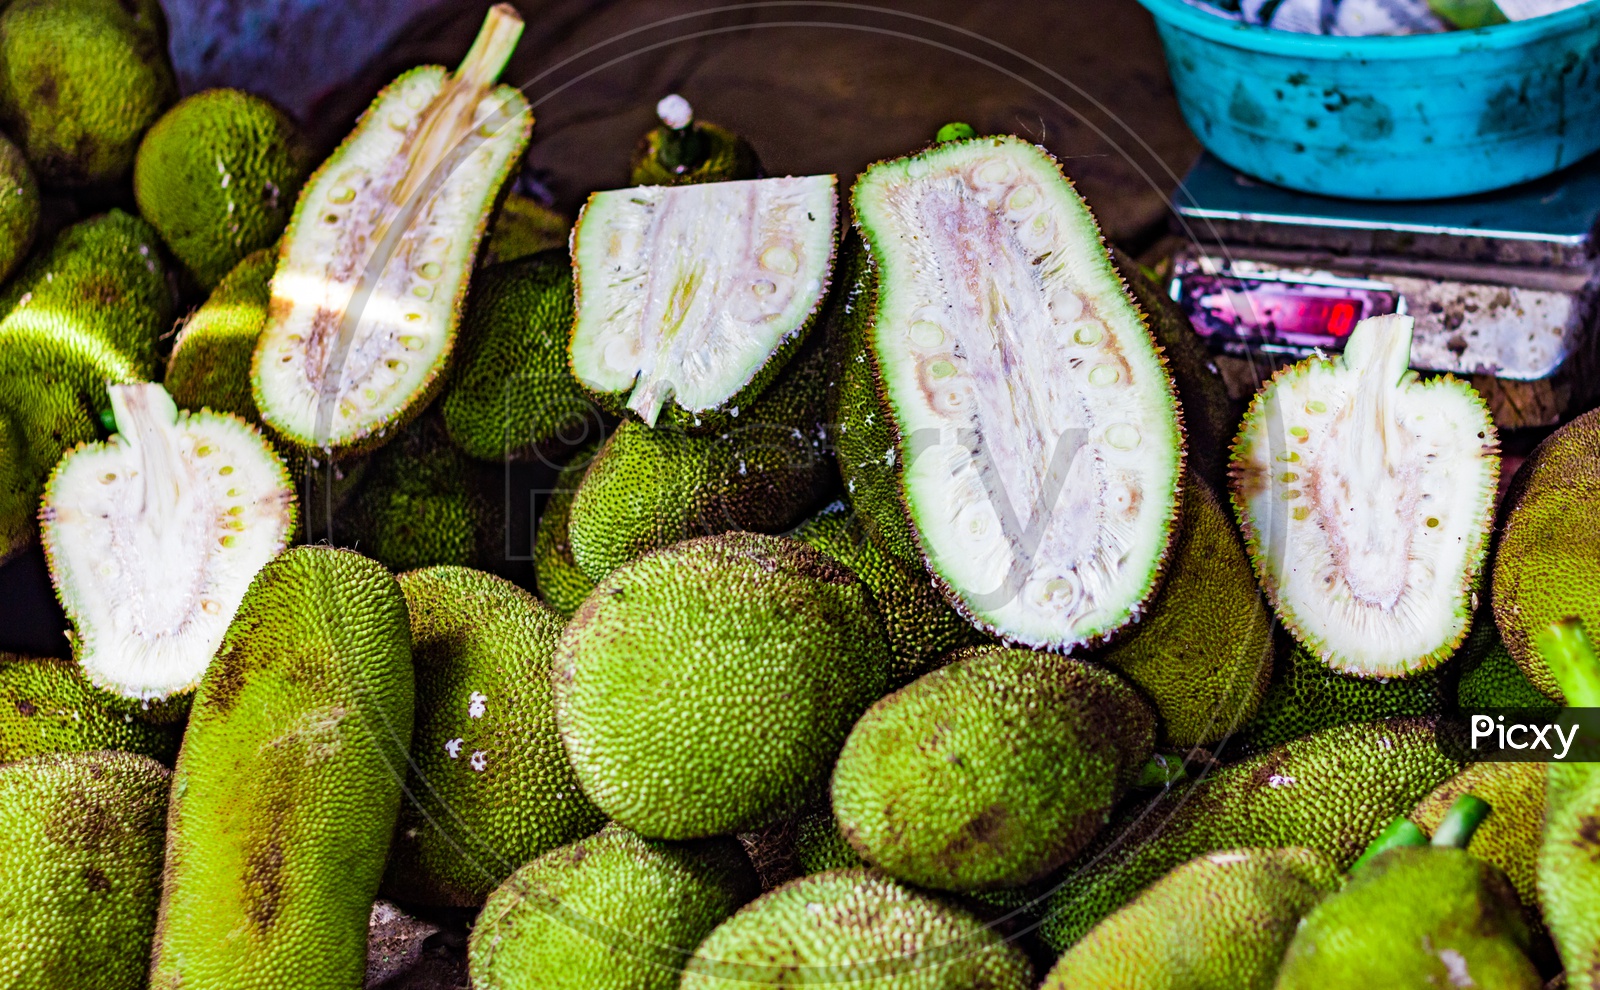 Heap Of Raw And Cut Kathal Jackfruit Echor In Retail Vegetable Super Market For Sale